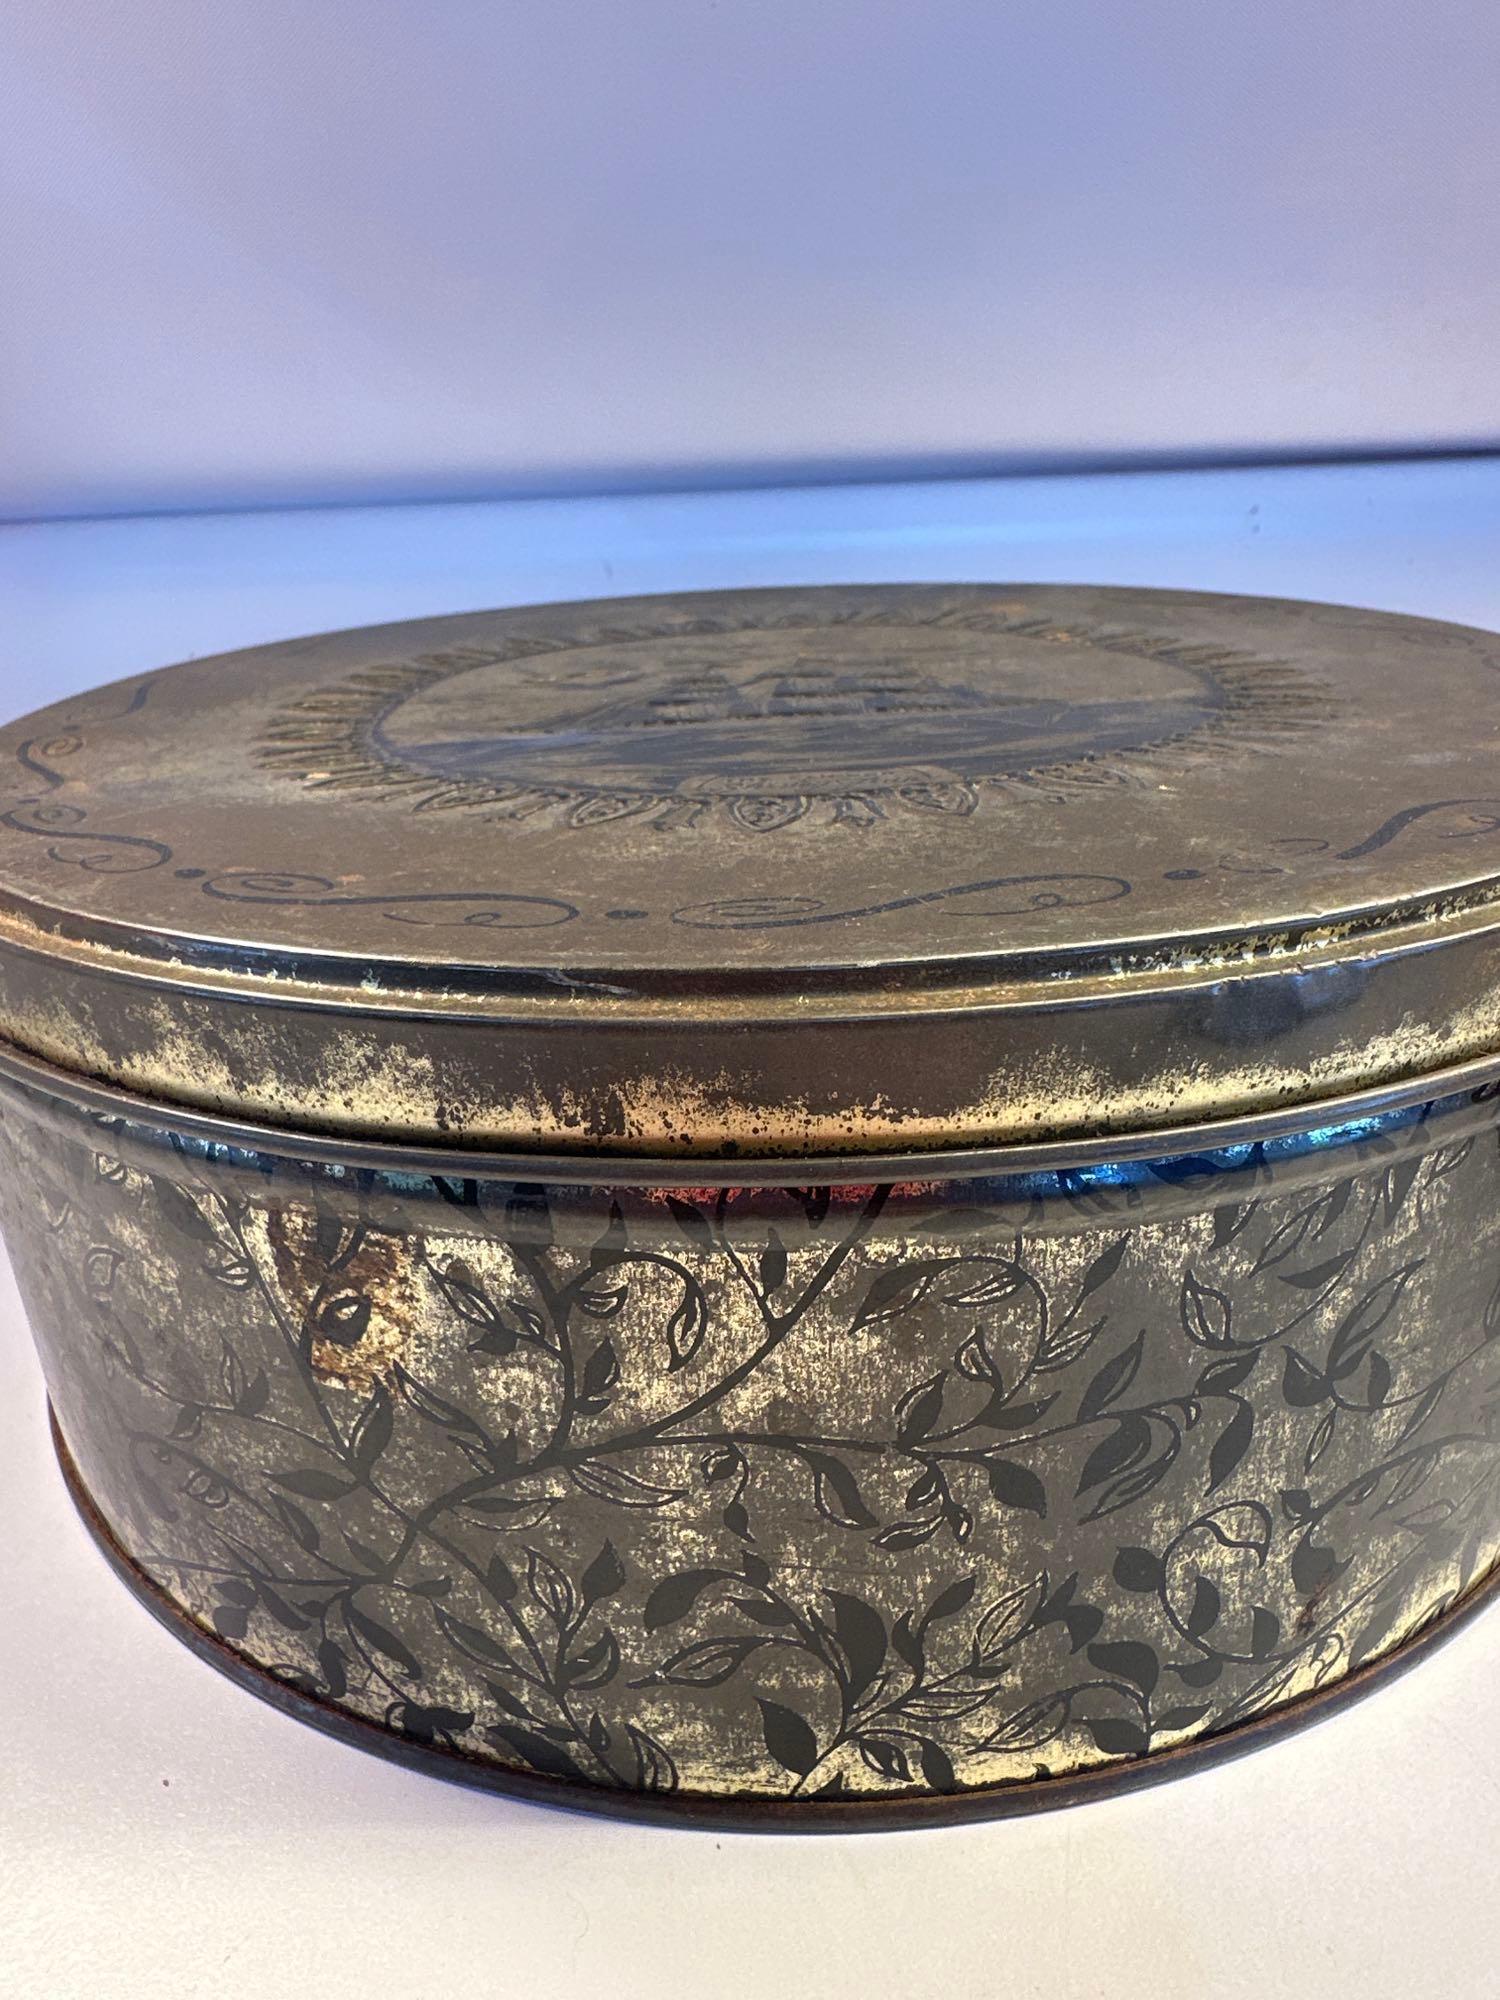 Vintage Merita Fruit Cake Tin with Lid/ Vintage The Clipper Tin With Lid